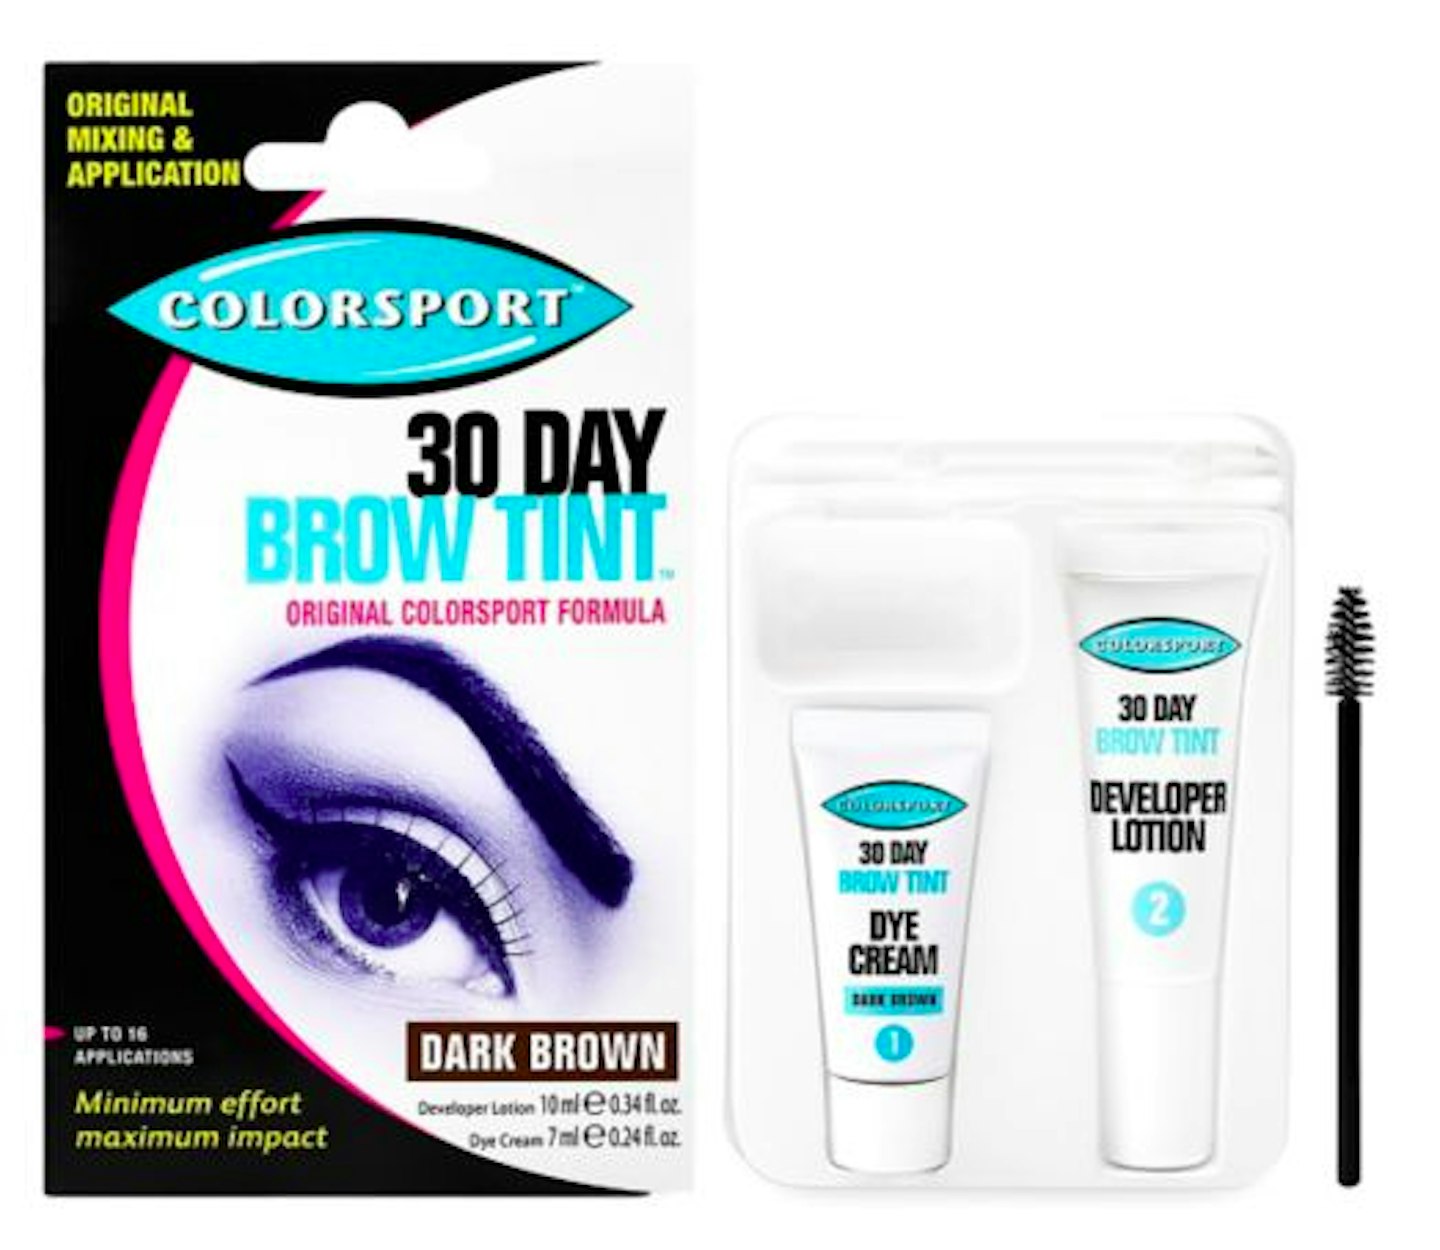 Colorsport 30 Day Brow Tint